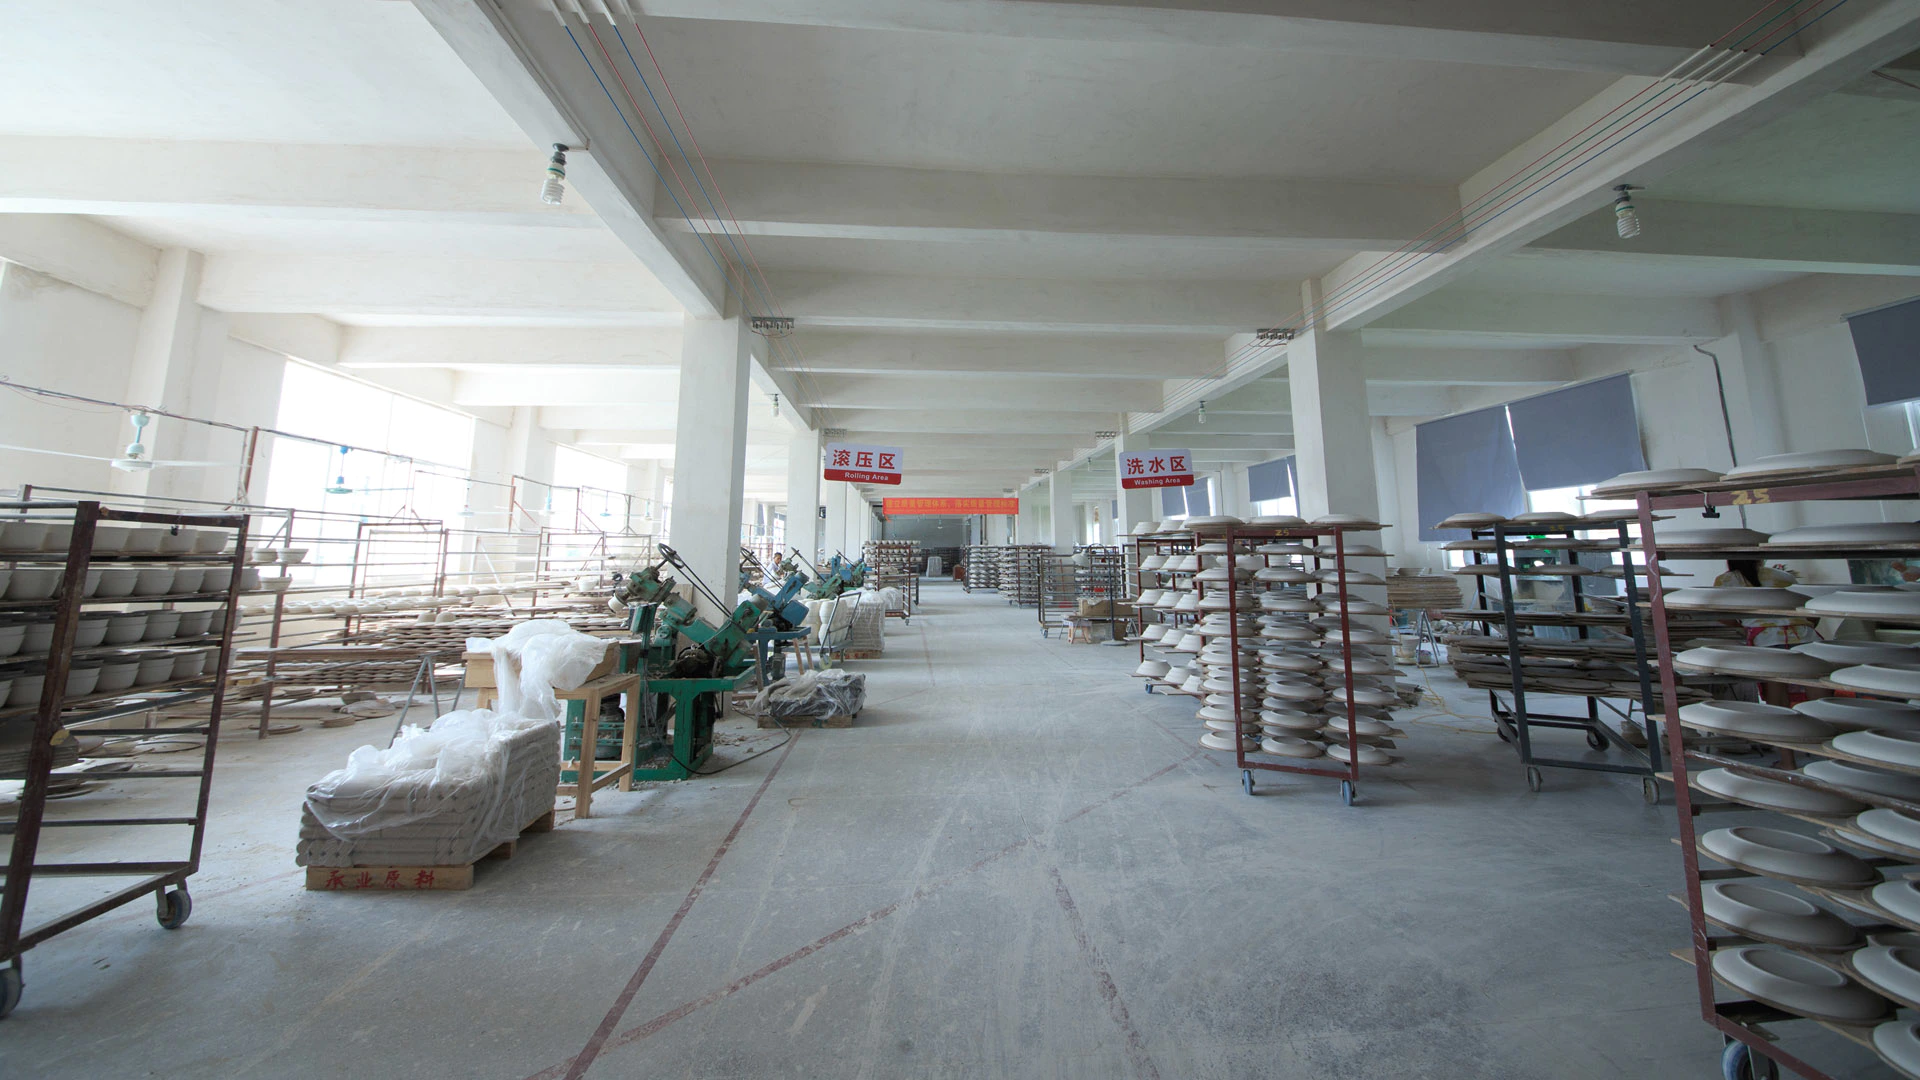 The second floor of the Two Eight Ceramics Factory - Rolling Workshop